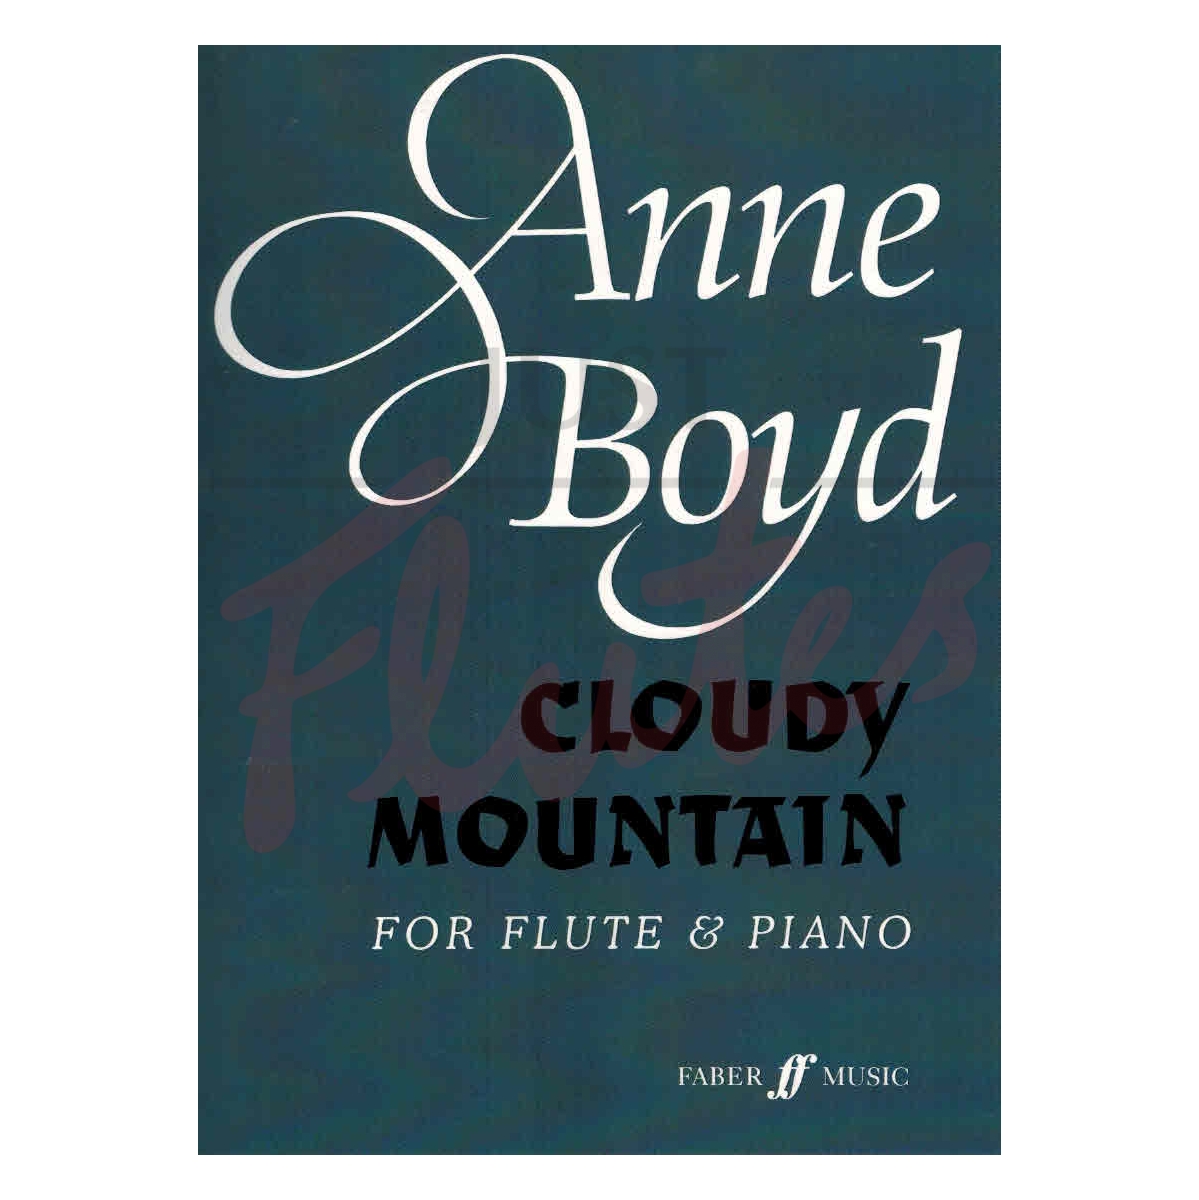 Cloudy Mountain for Flute and Piano